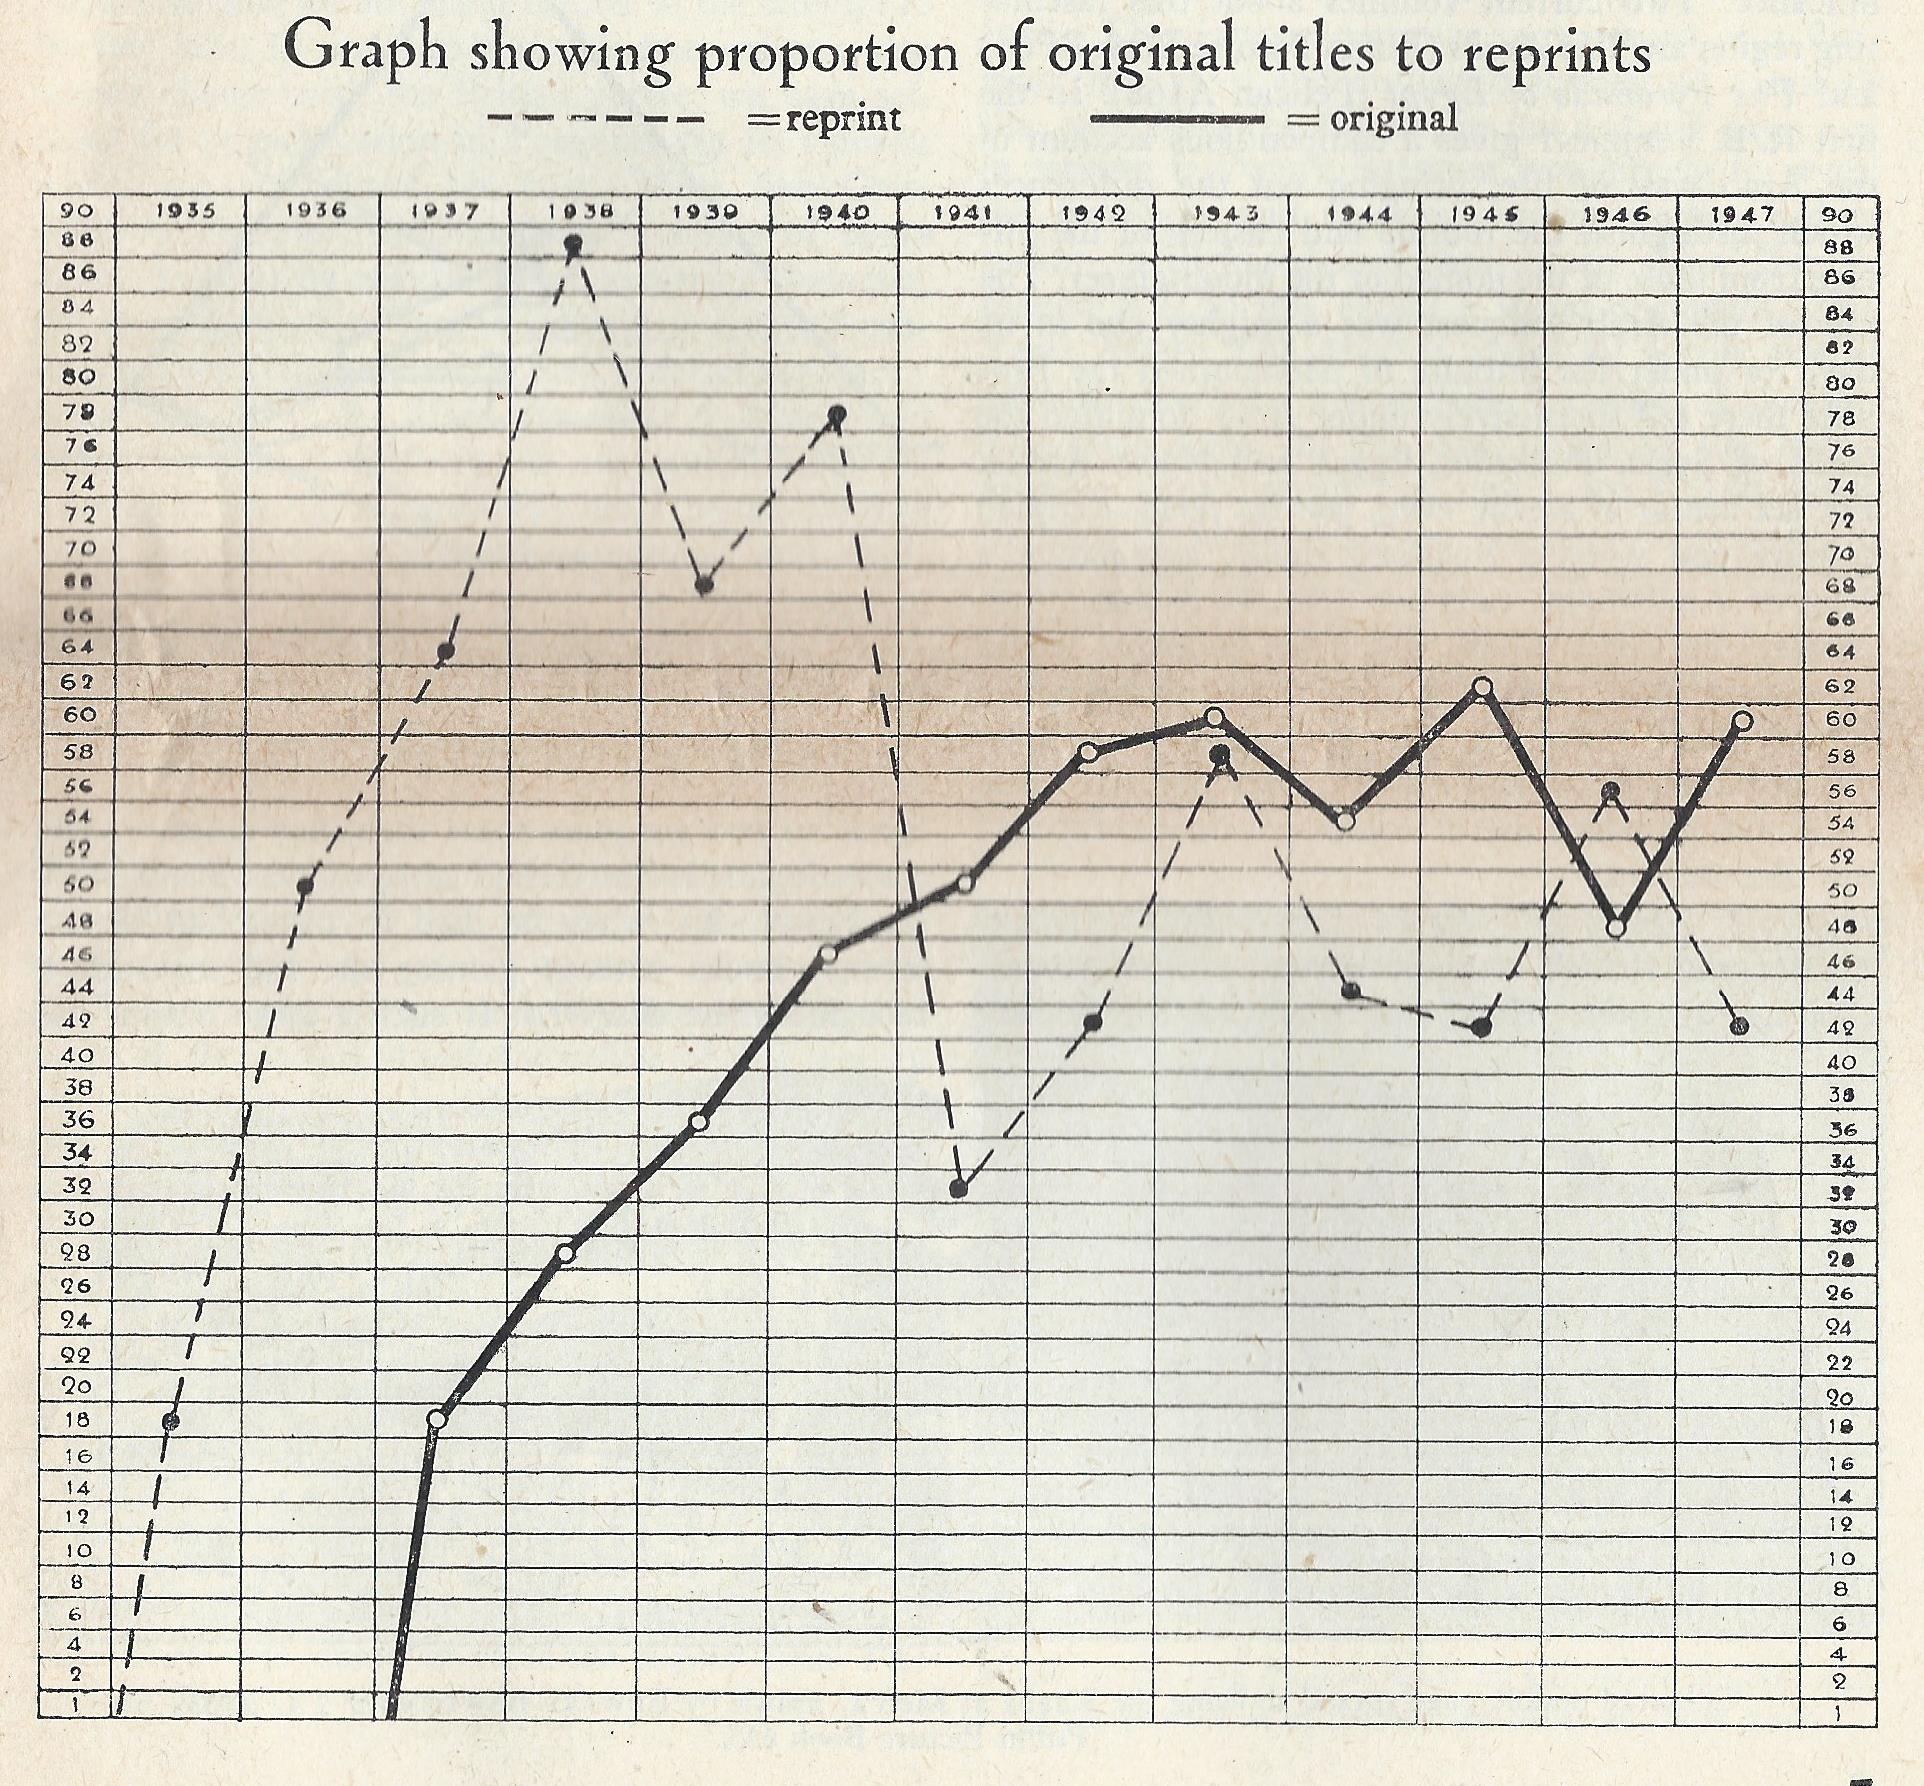 Chart of New Works against Reprints From Penguins Progress 6